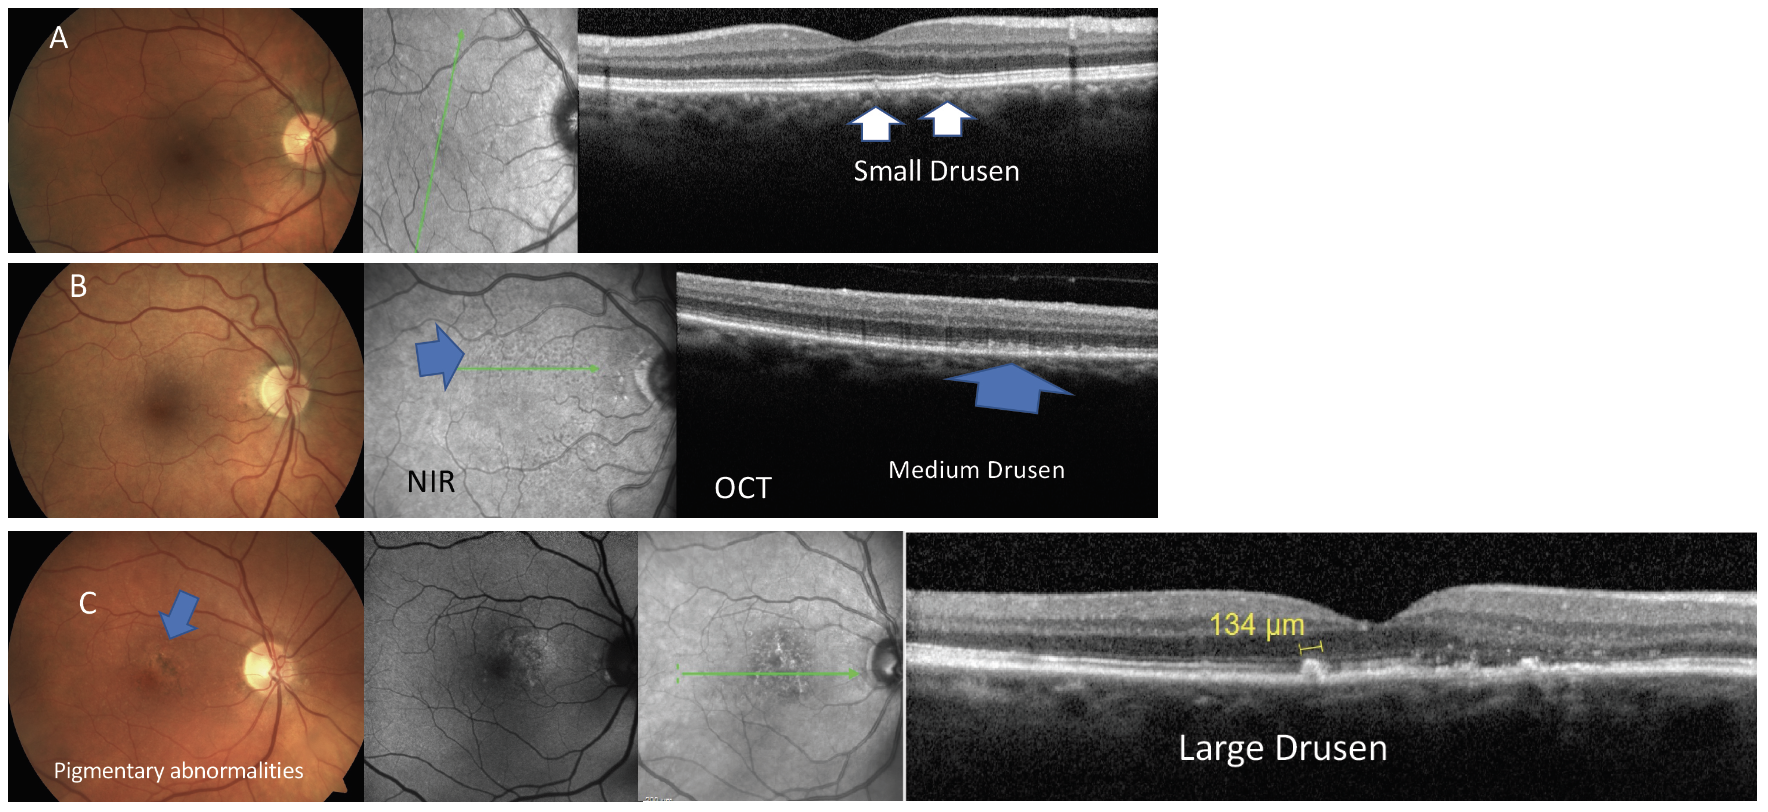 Fig. 4. Examples of the stages of dry or atrophic macular degeneration shown by common imaging modalities.